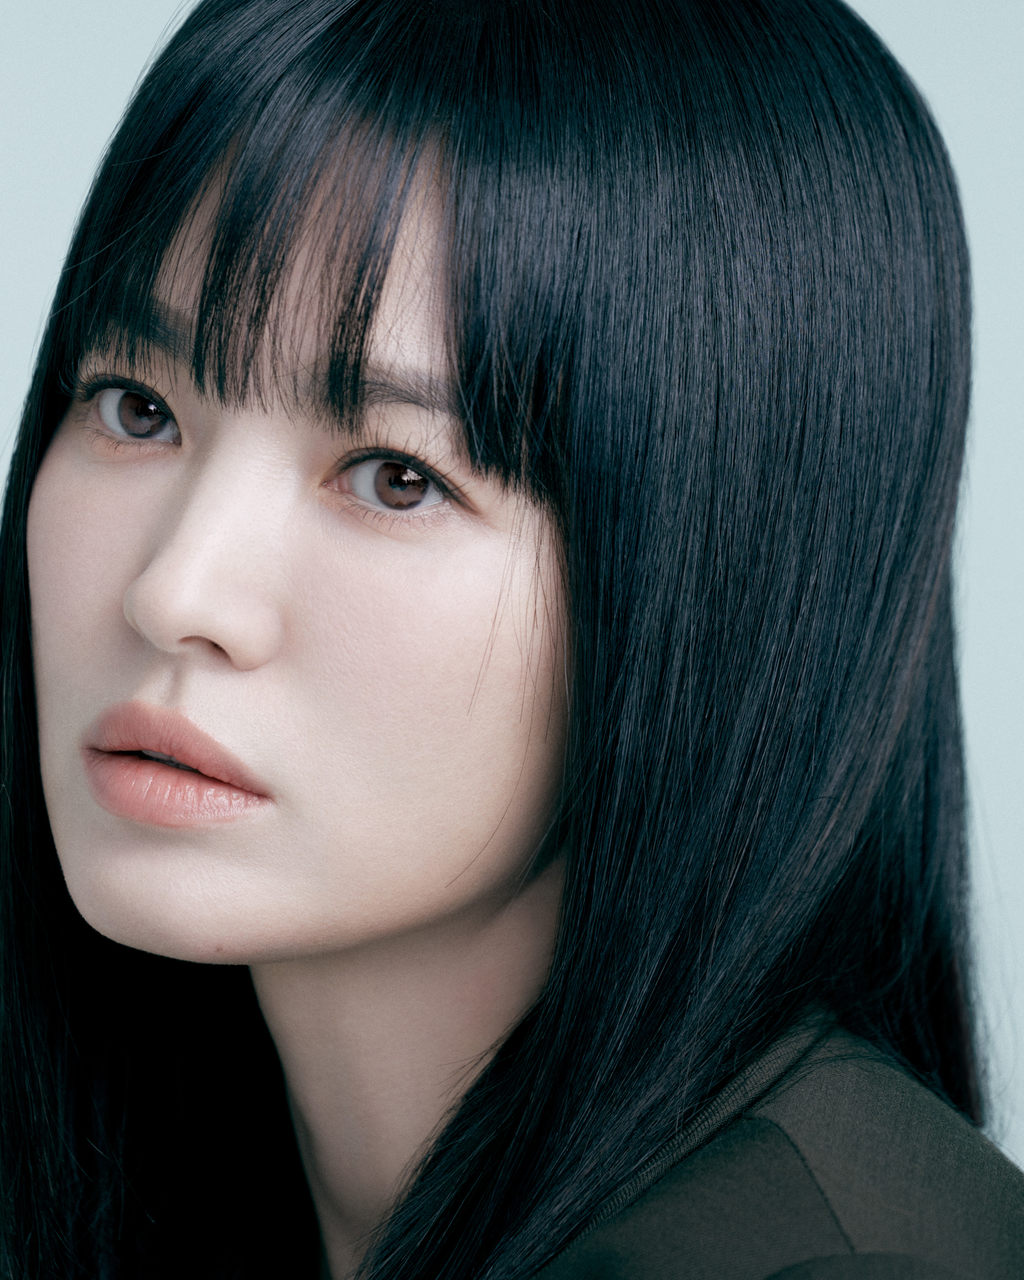 Song Hye Kyo in The Glory